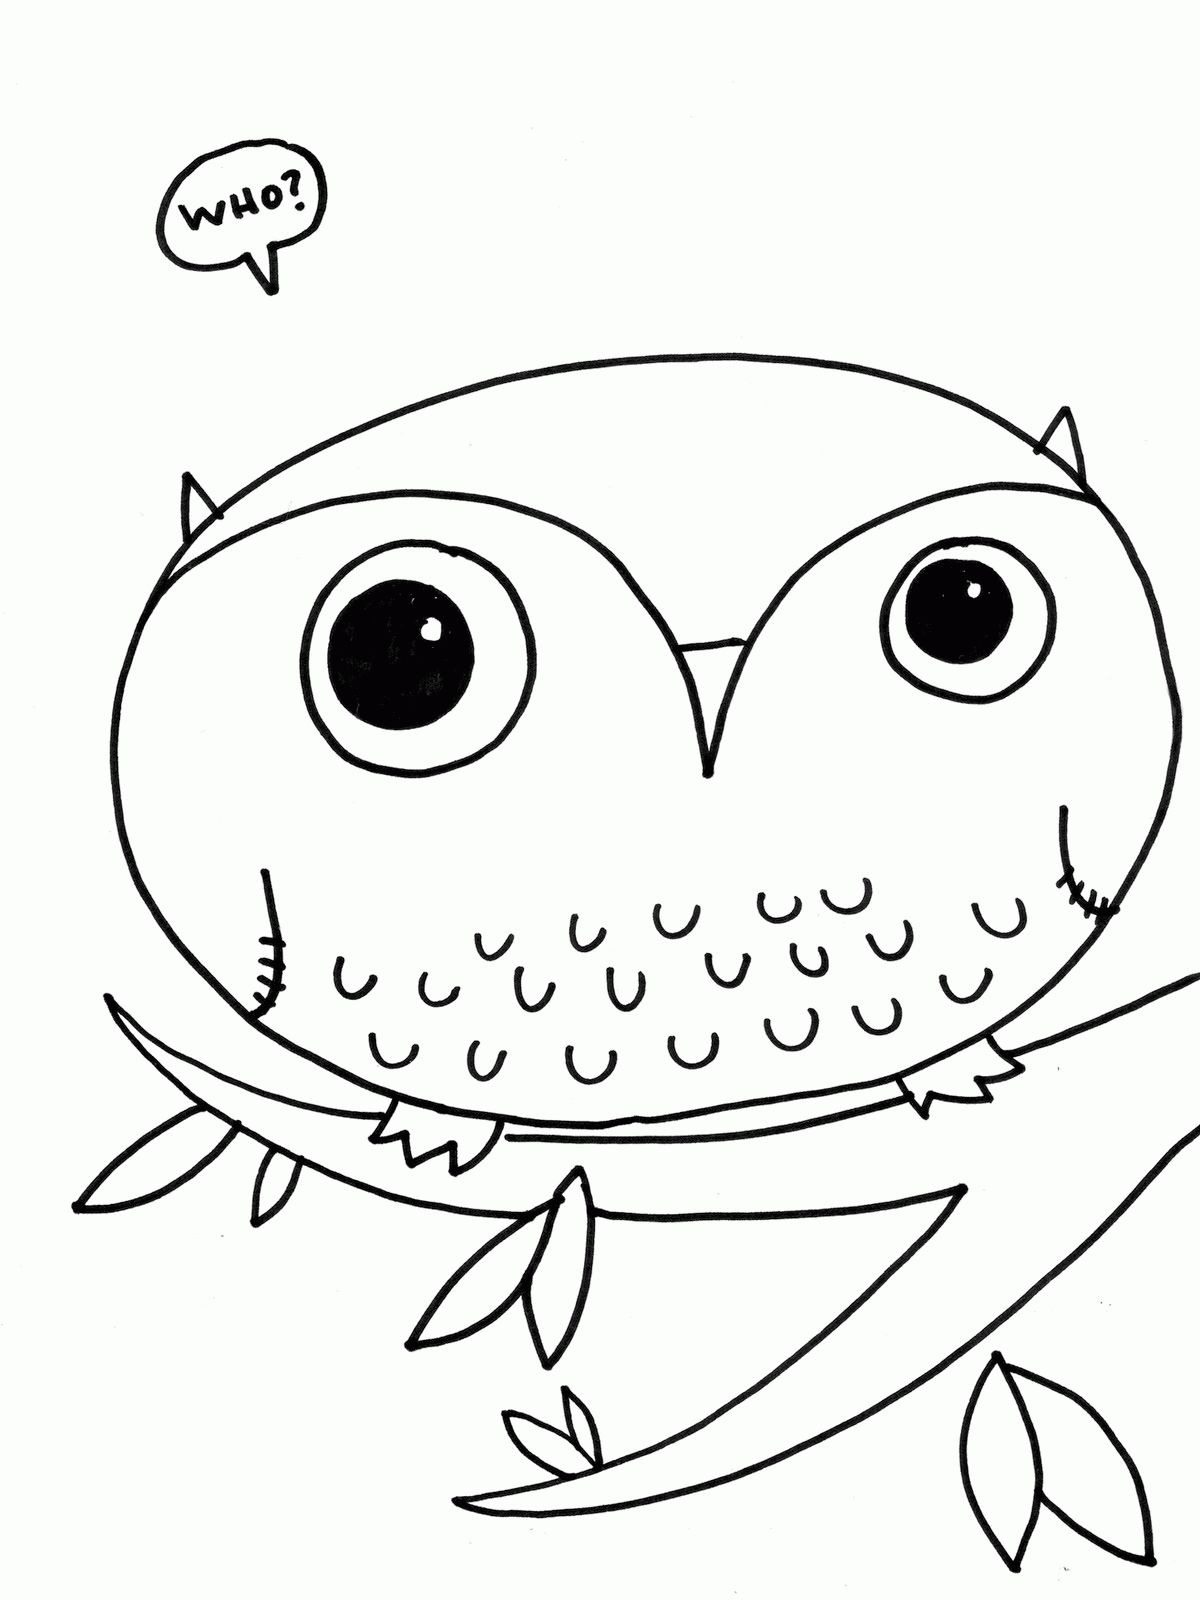 Cute Owl - Coloring Pages for Kids and for Adults